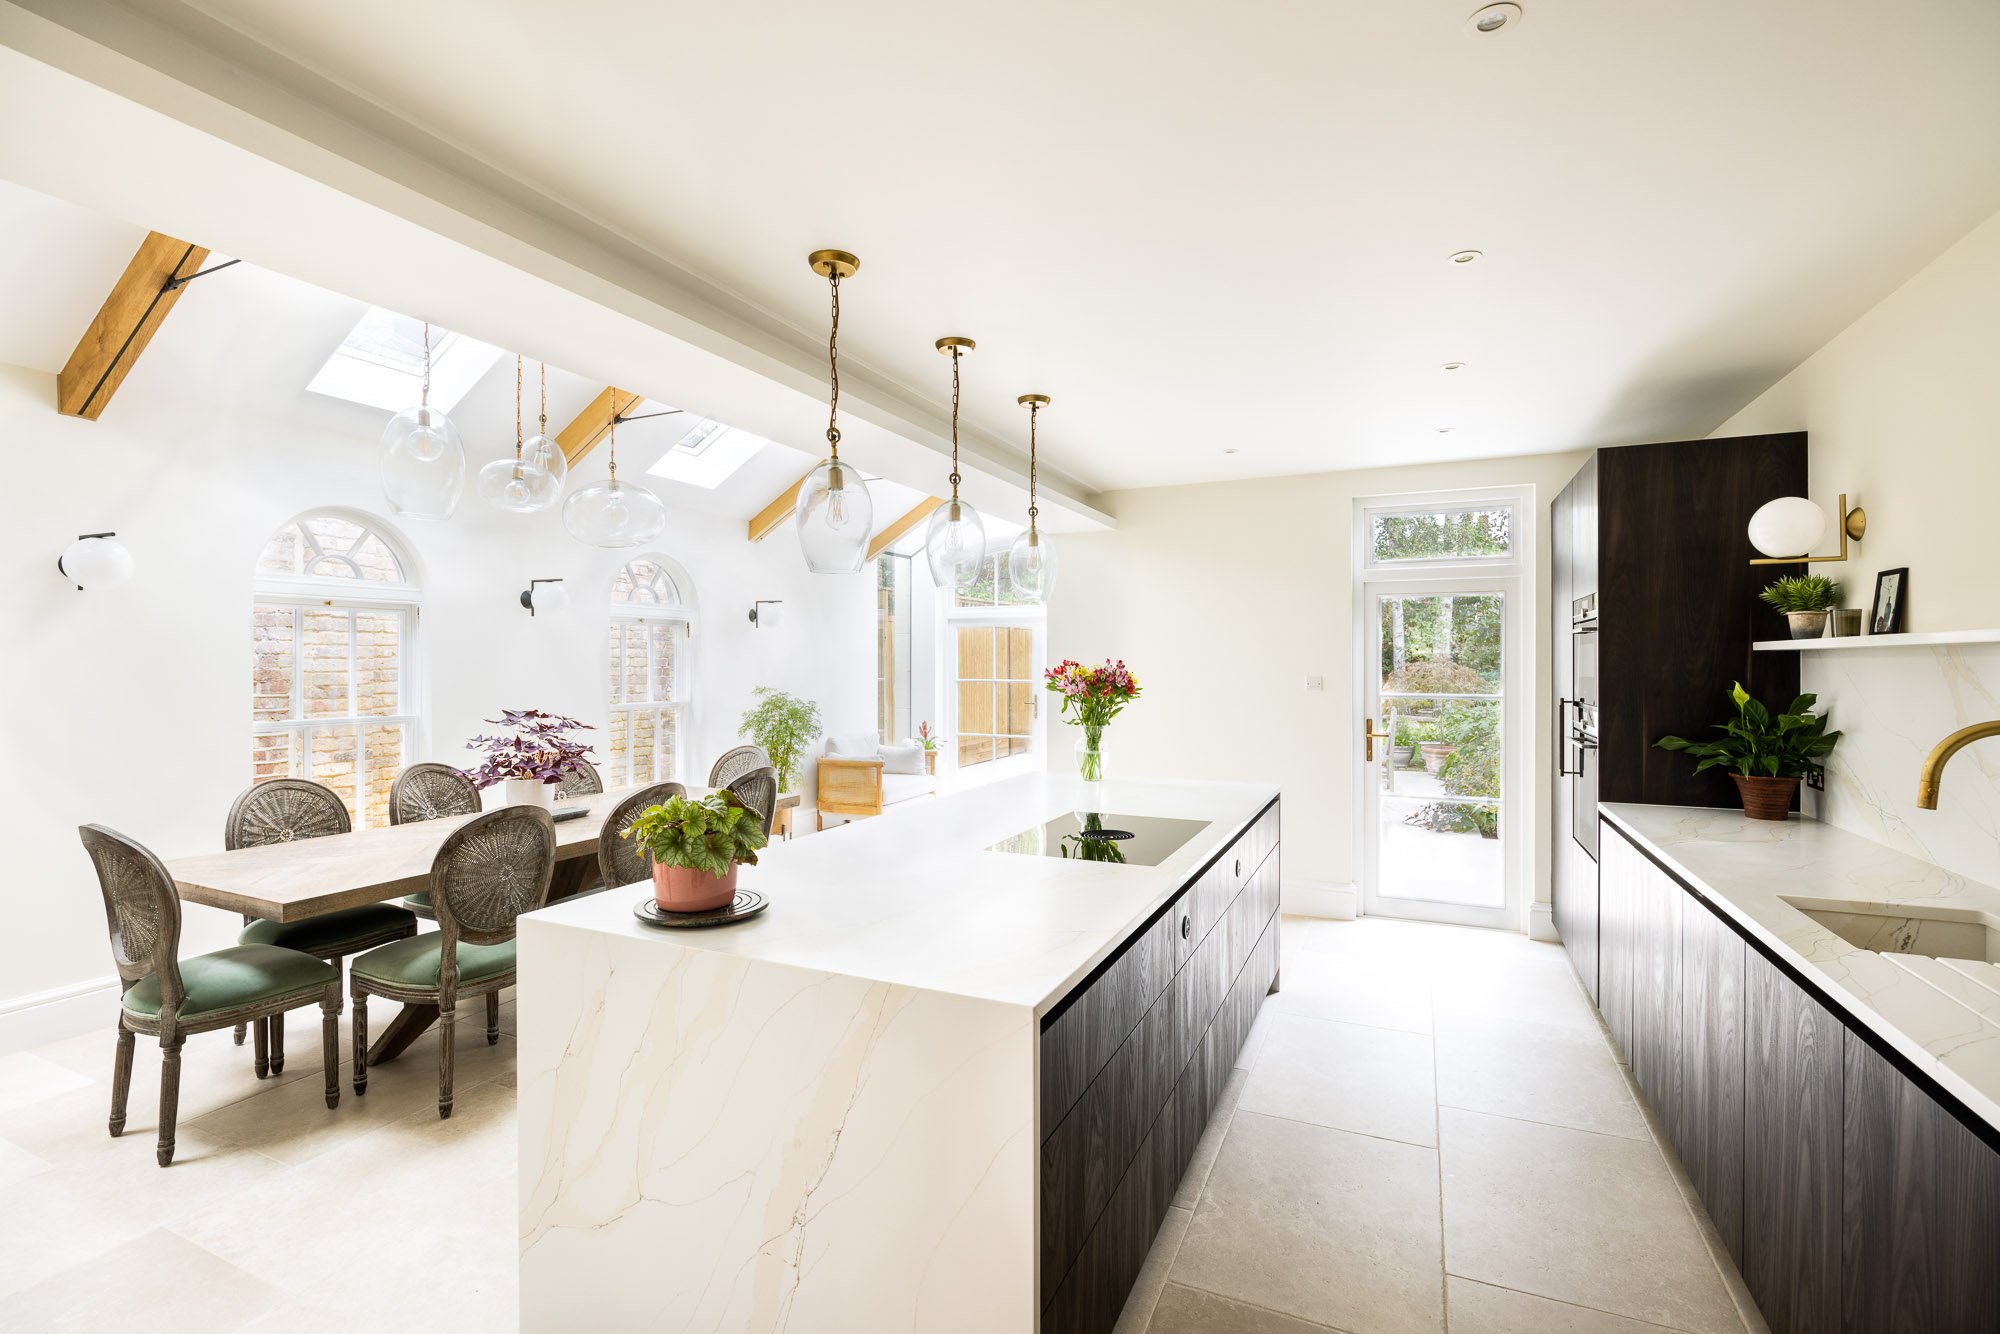 Kitchen-extension-by-Gibson-Builders-photographed-by-South-London-Interior-photographer.jpg